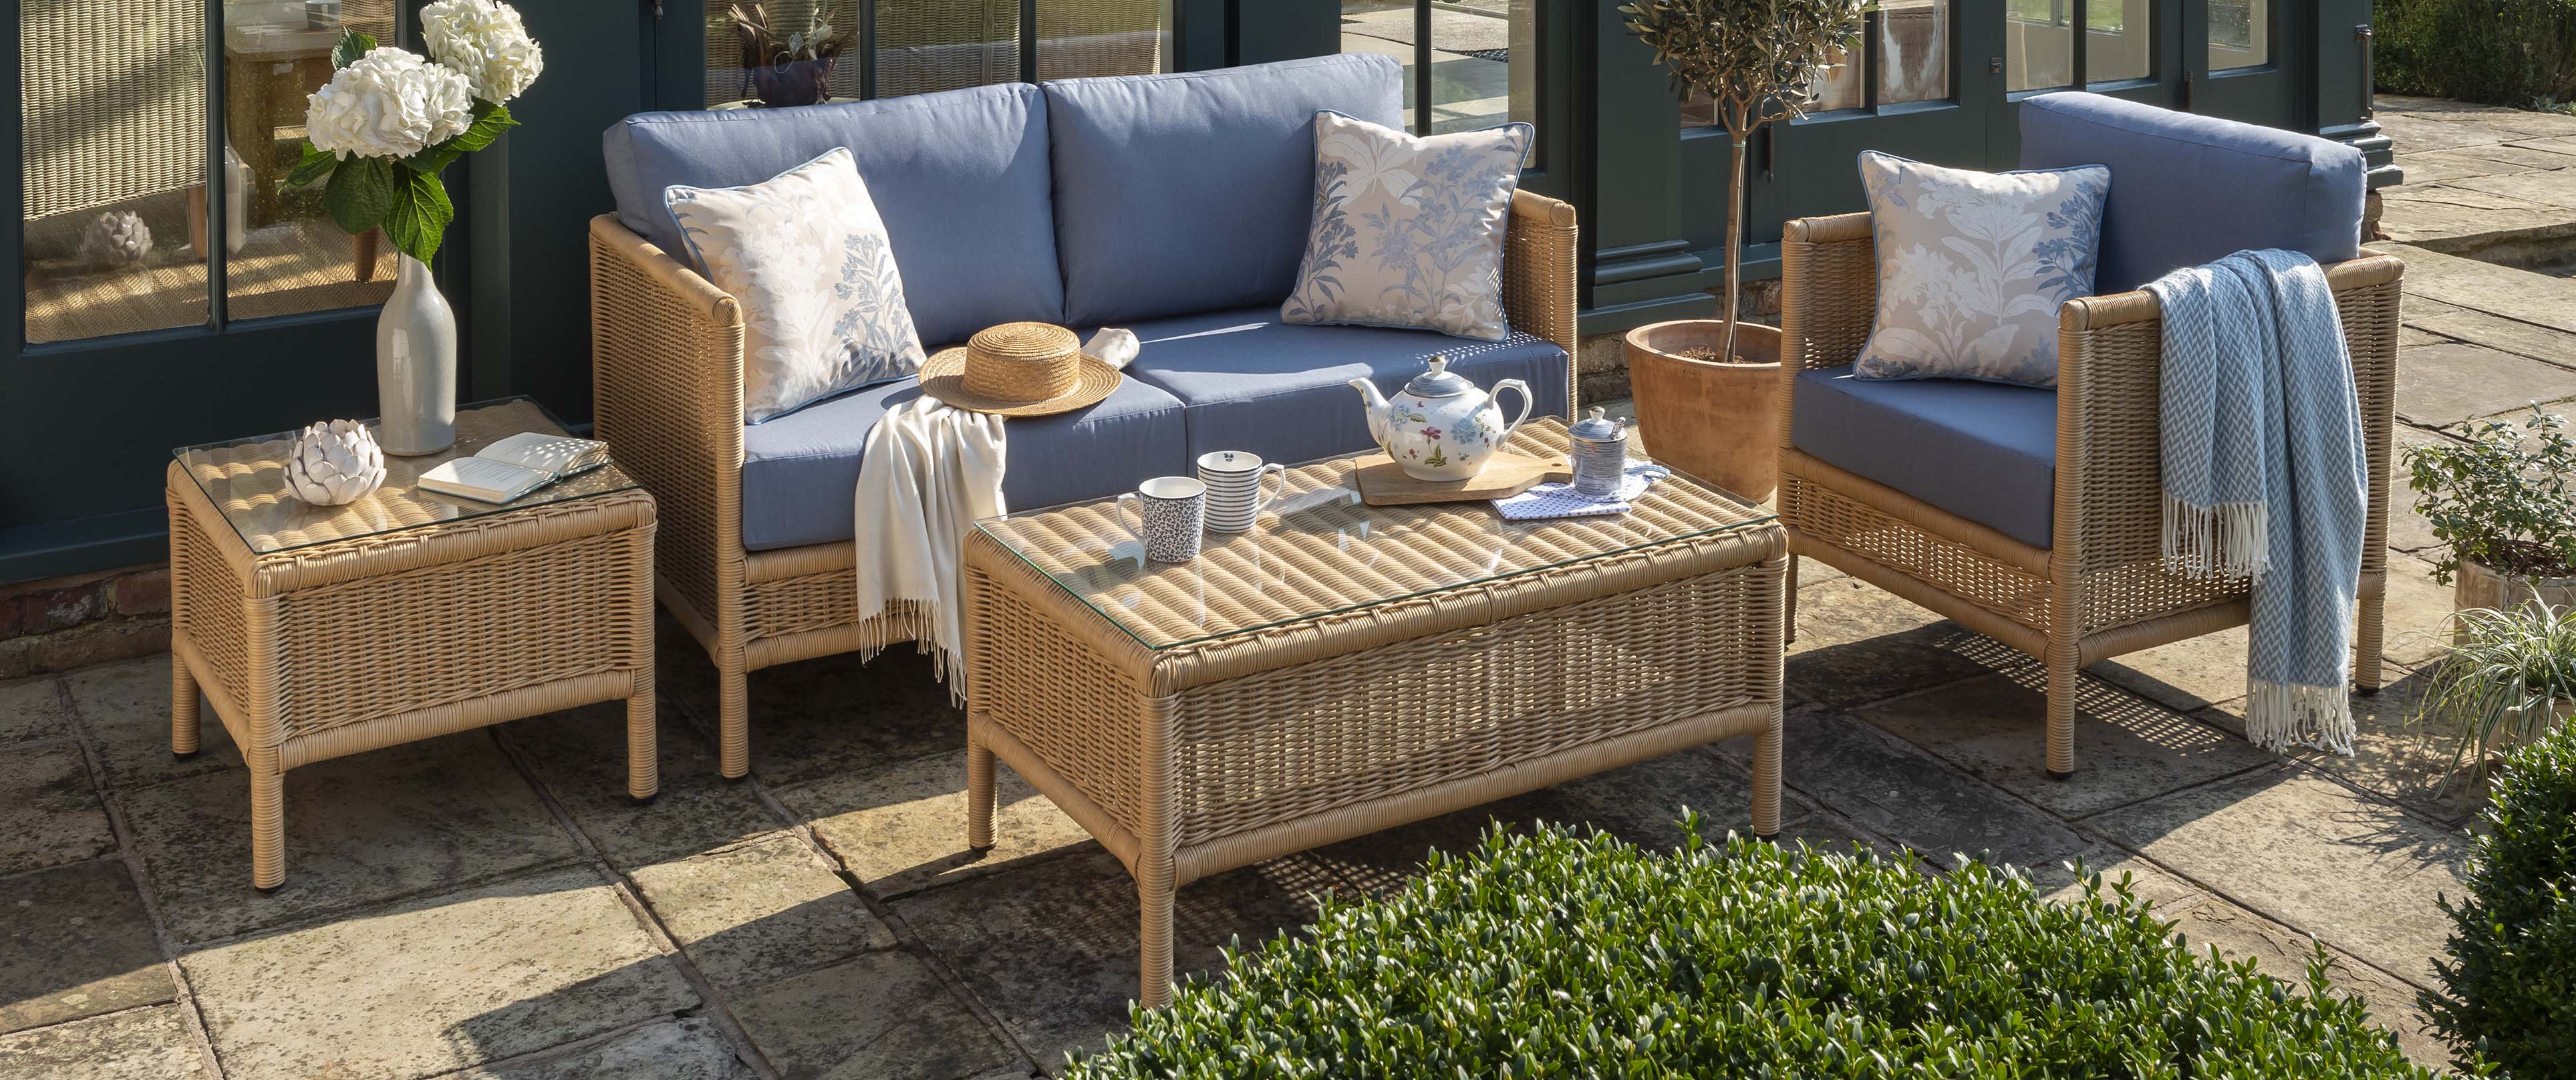 Vilamoura_Lounging Outdoor Suite by Laura Ashley